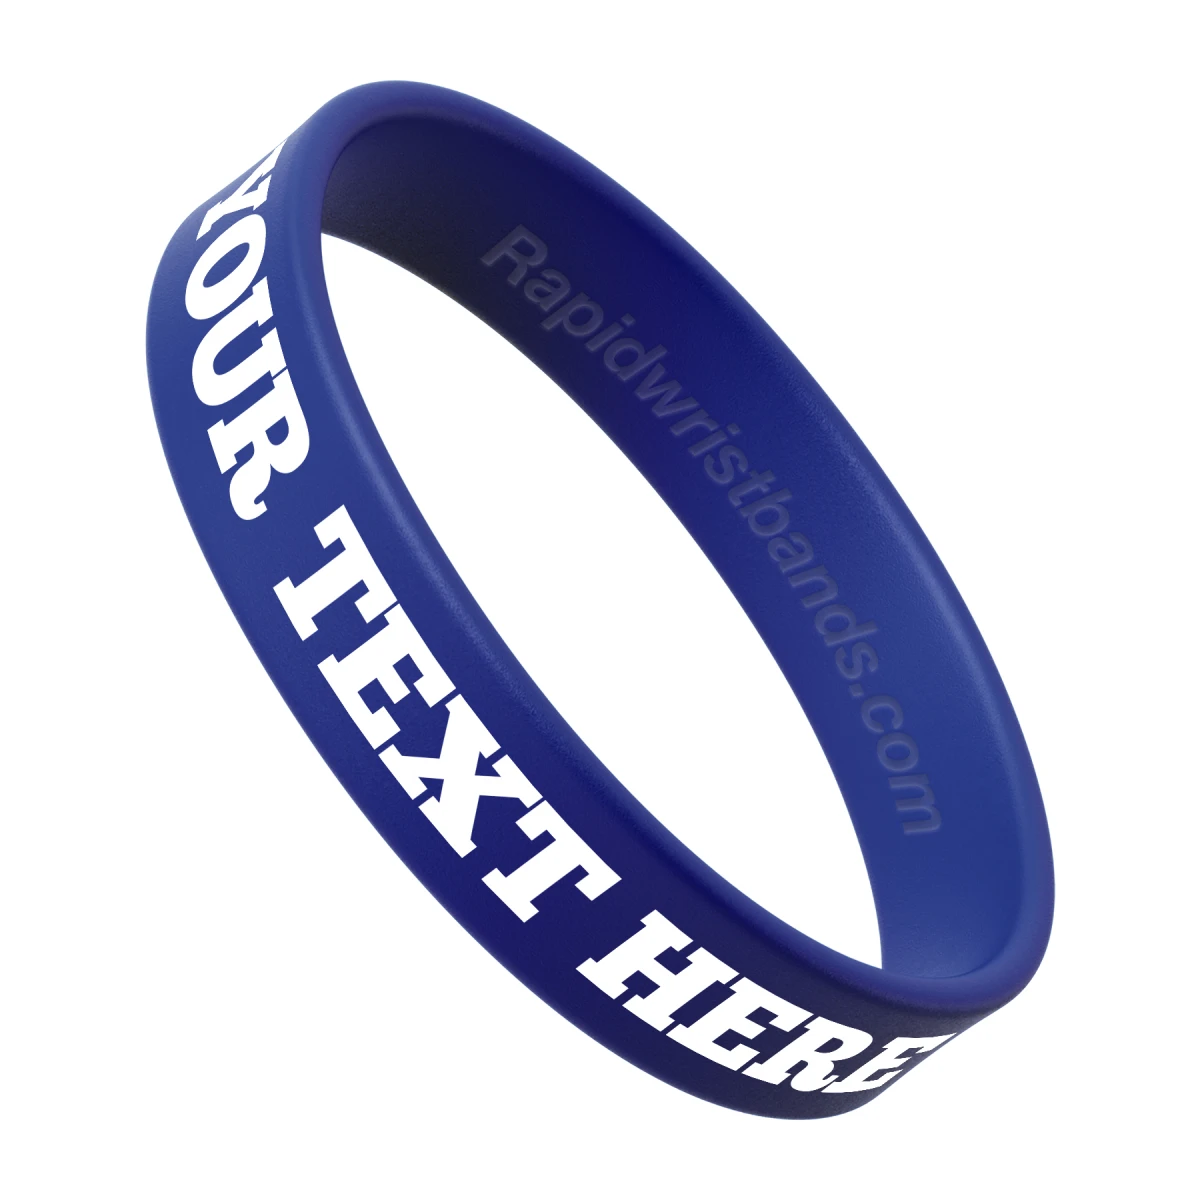 Royal Blue Wristband With Your Text Here Printed In White